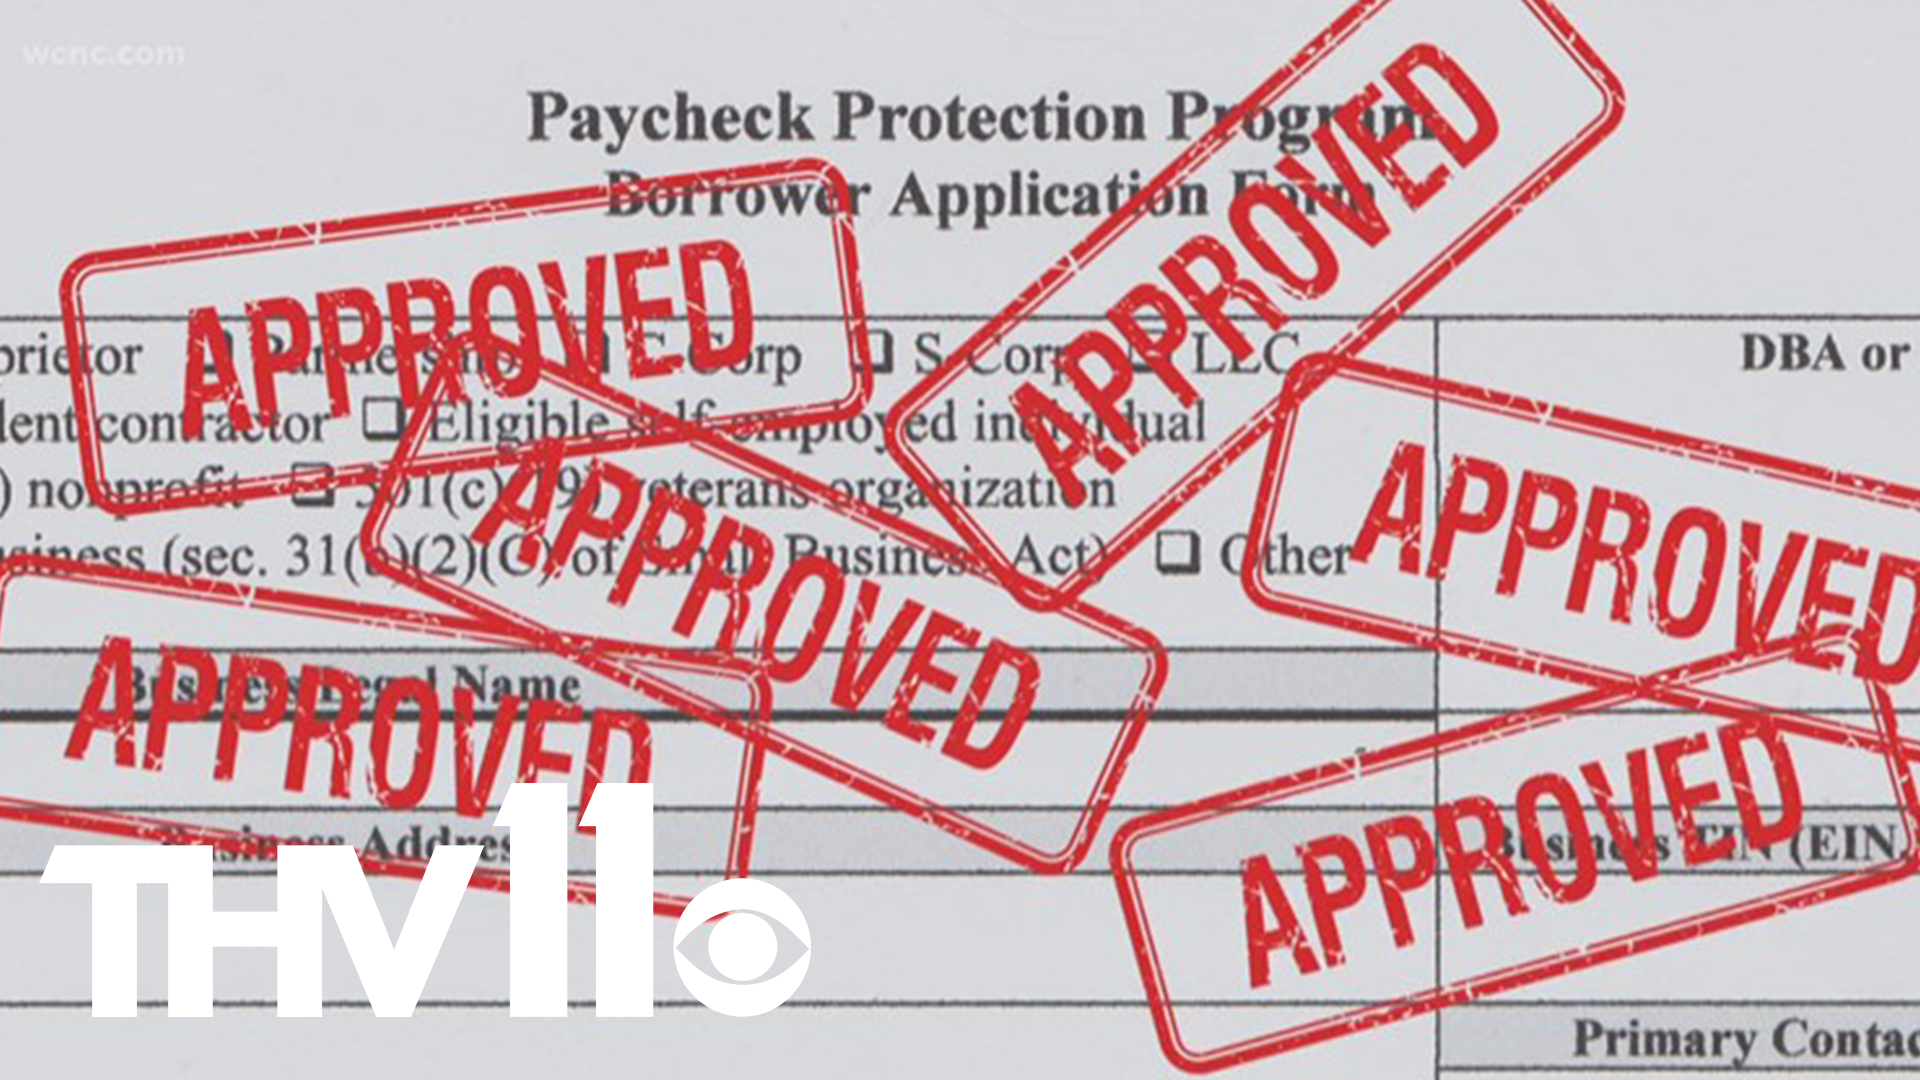 The deadline to apply for forgivable paycheck protection loans is March 31st, next Wednesday.